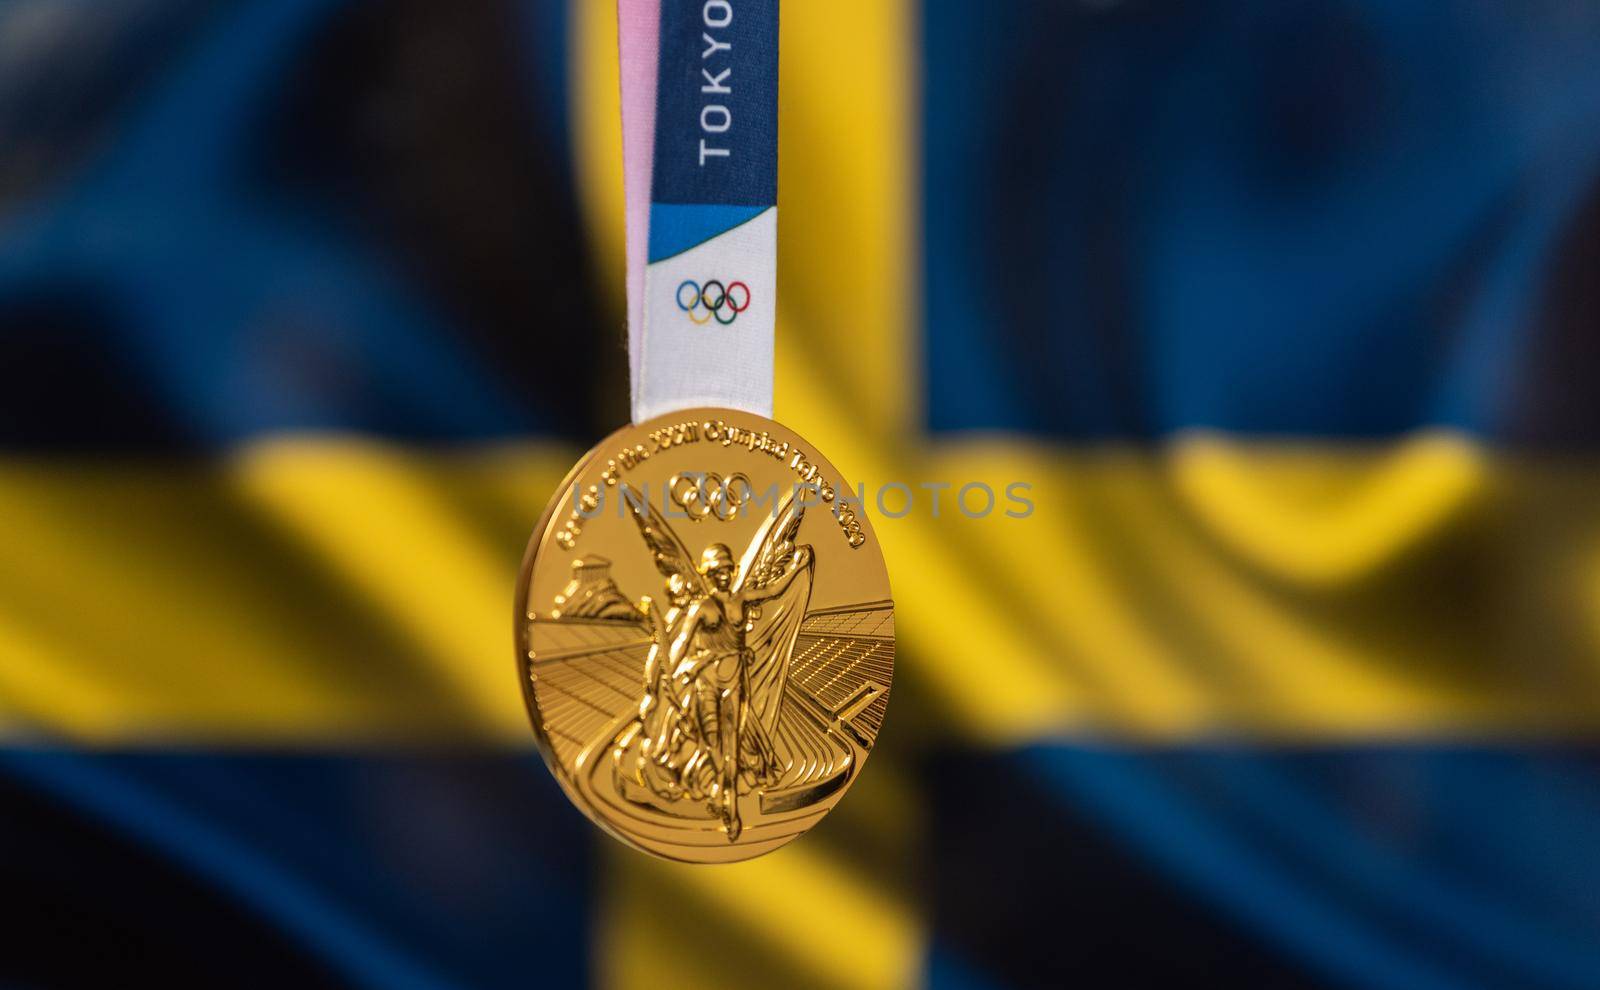 April 25, 2021 Tokyo, Japan. Gold medal of the XXXII Summer Olympic Games 2020 in Tokyo on the background of the flag of Sweden.